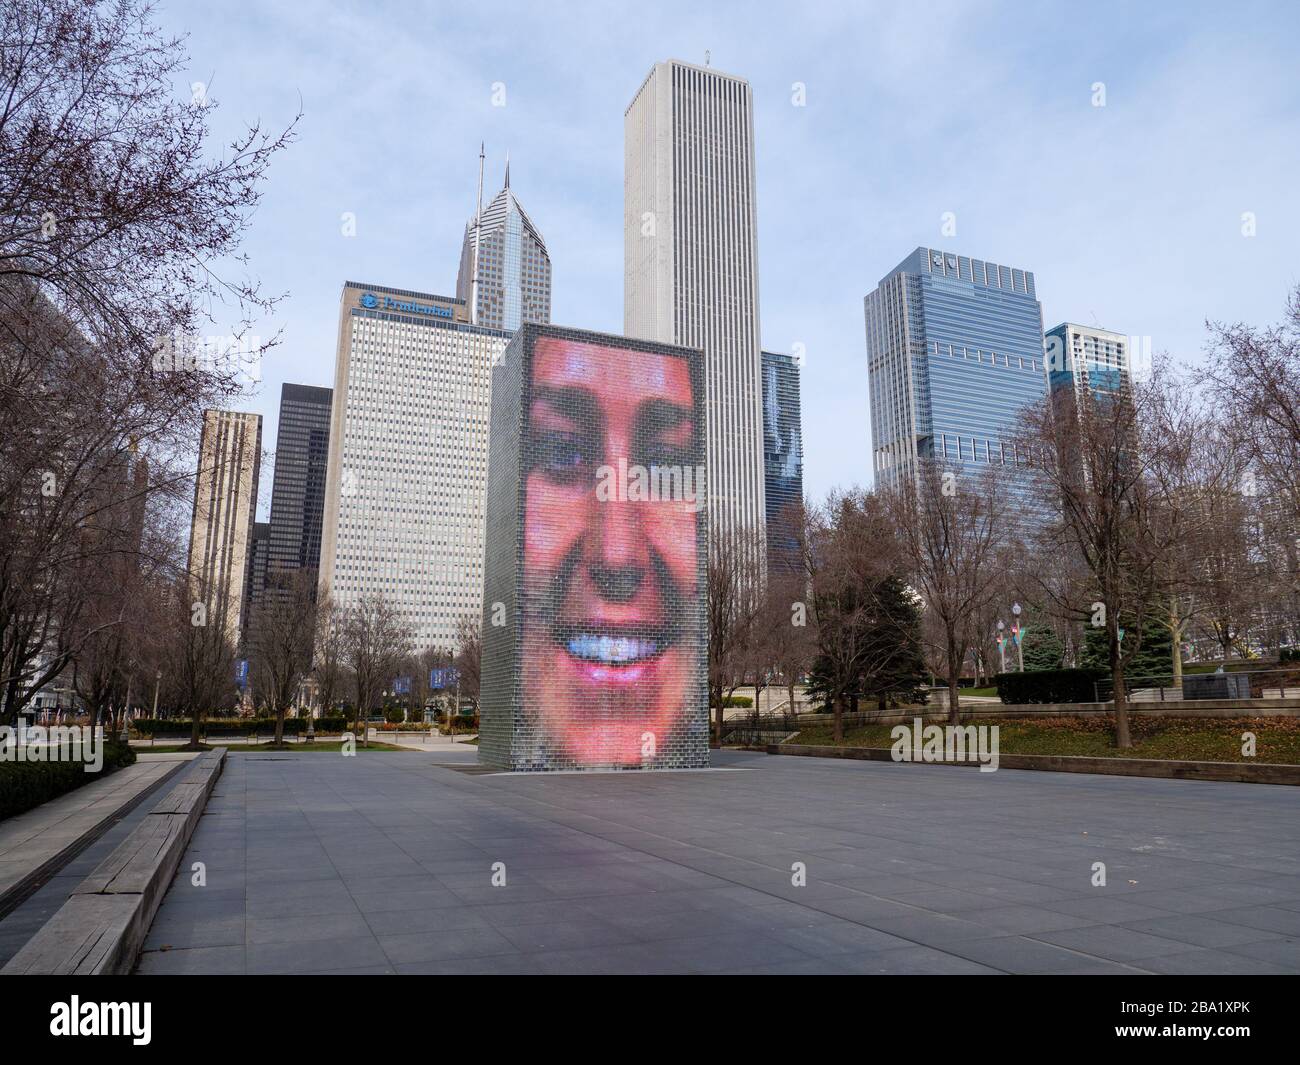 Chicago, Illinois, USA. 24th March 2020. Crown Fountain in Millennium Park, which usually attracts many people is empty today do to the stay at home order in effect. Stock Photo